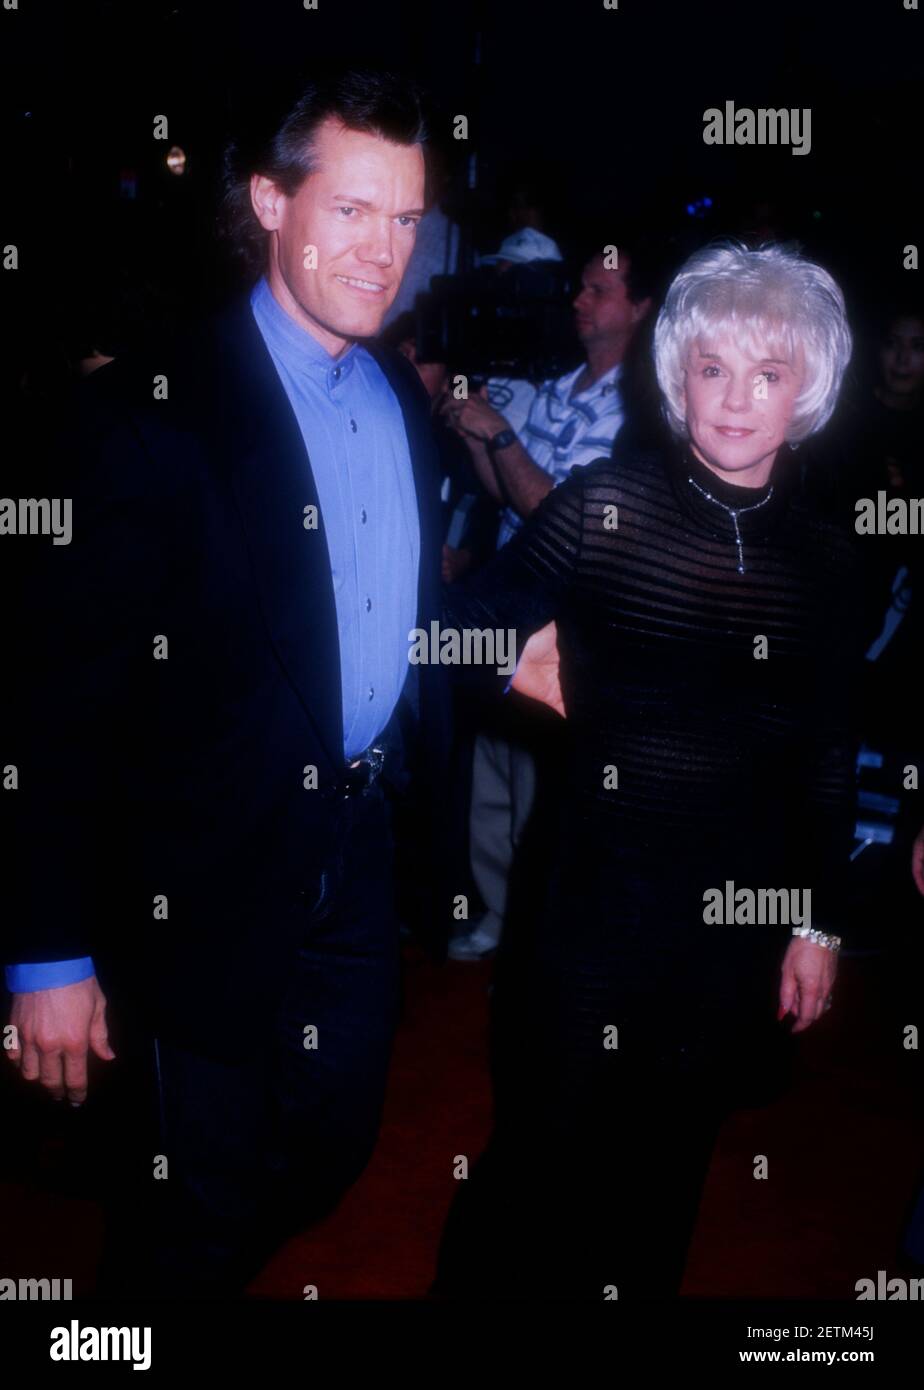 Westwood, California, USA 8th May 1996 Singer Randy Travis and Elizabeth Hatcher-Travis attend Warner Bros. Pictures 'Twister' Premiere on May 8, 1996 Village in Westwood, California, USA. by